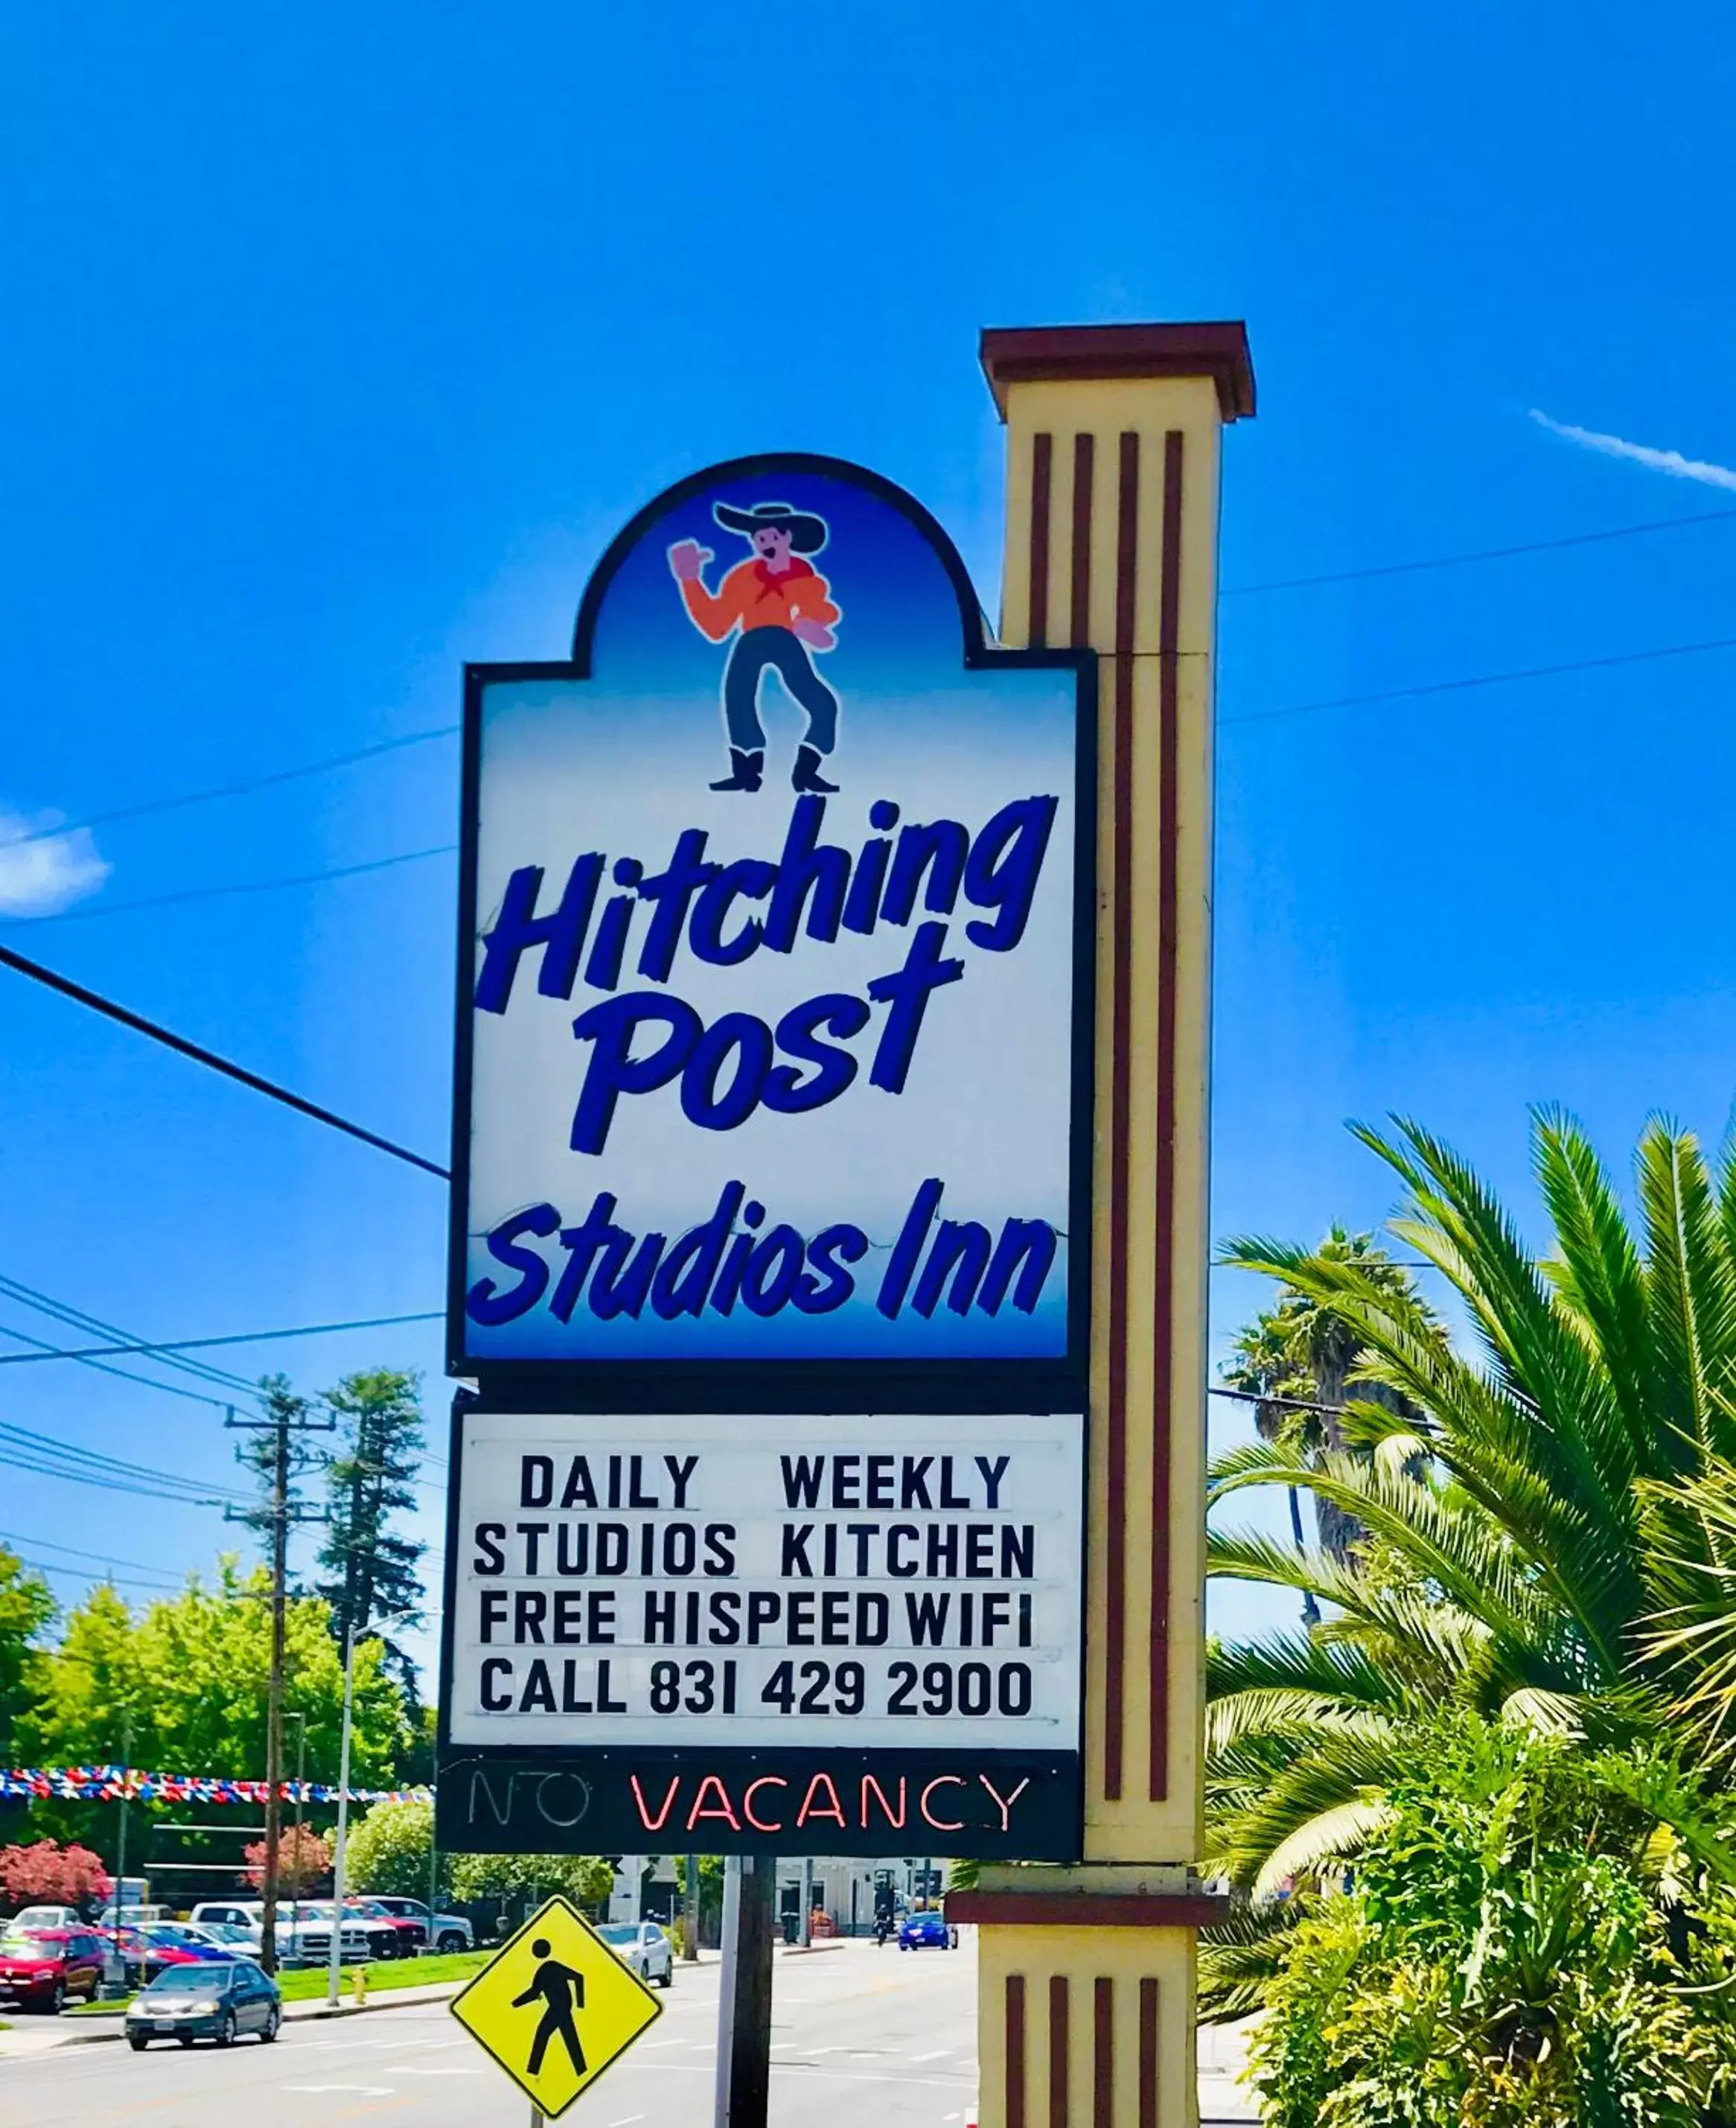 Property logo or sign, Property Logo/Sign in Hitching Post Studios Inn